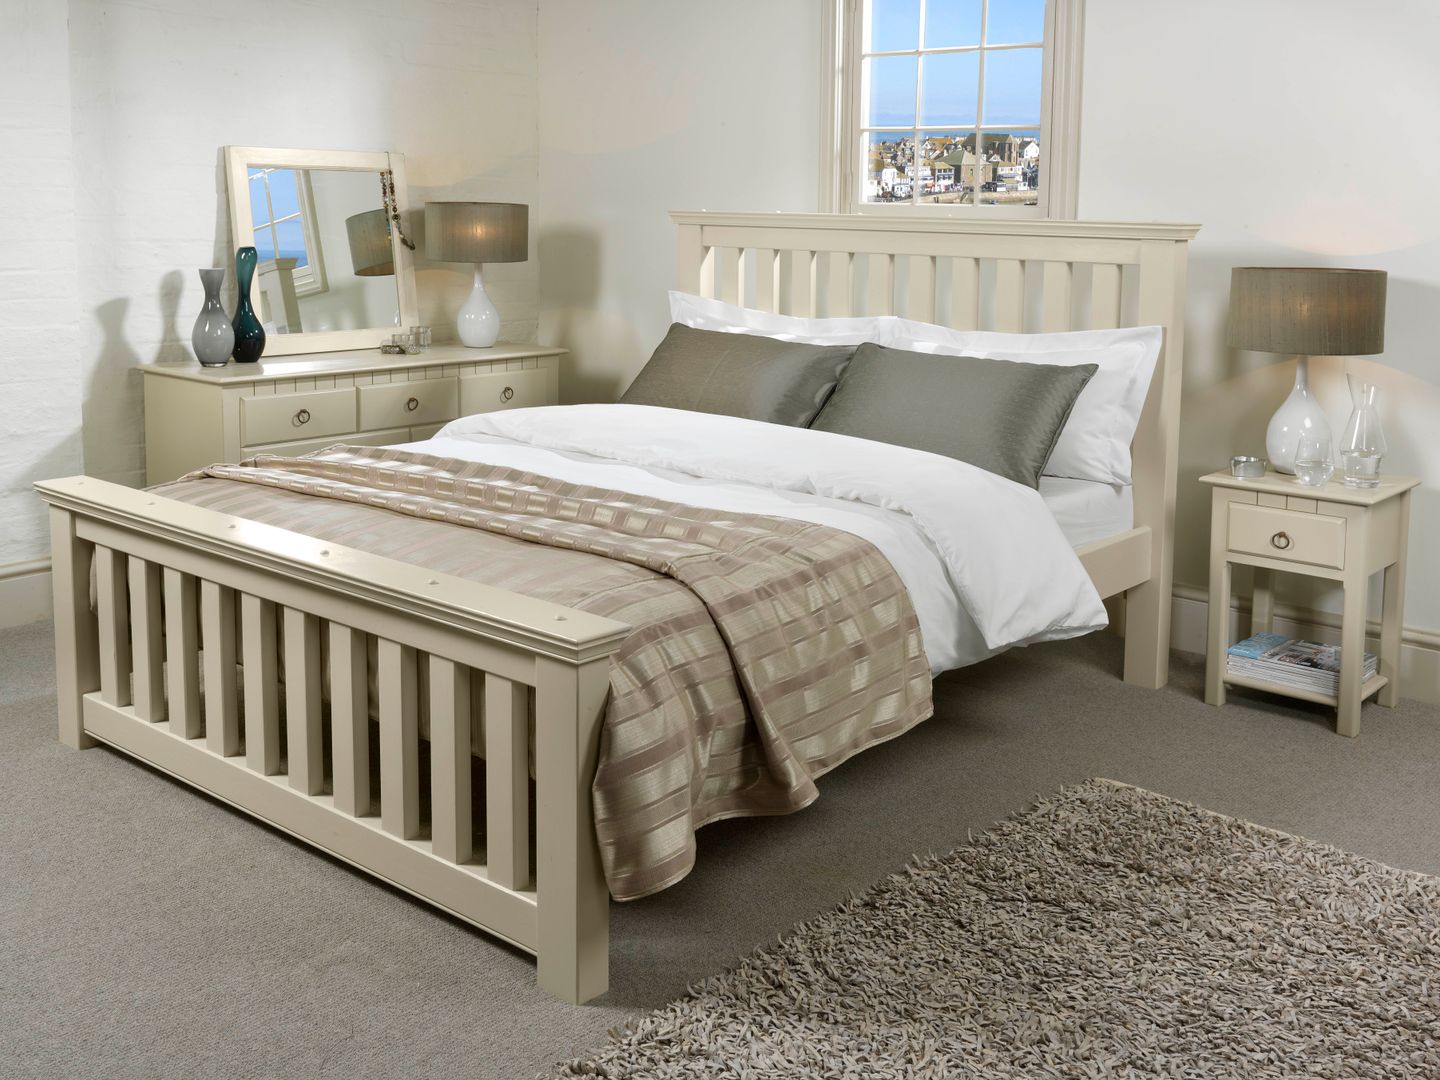 The Maine New England Bed Revival Beds Bedroom Beds & headboards